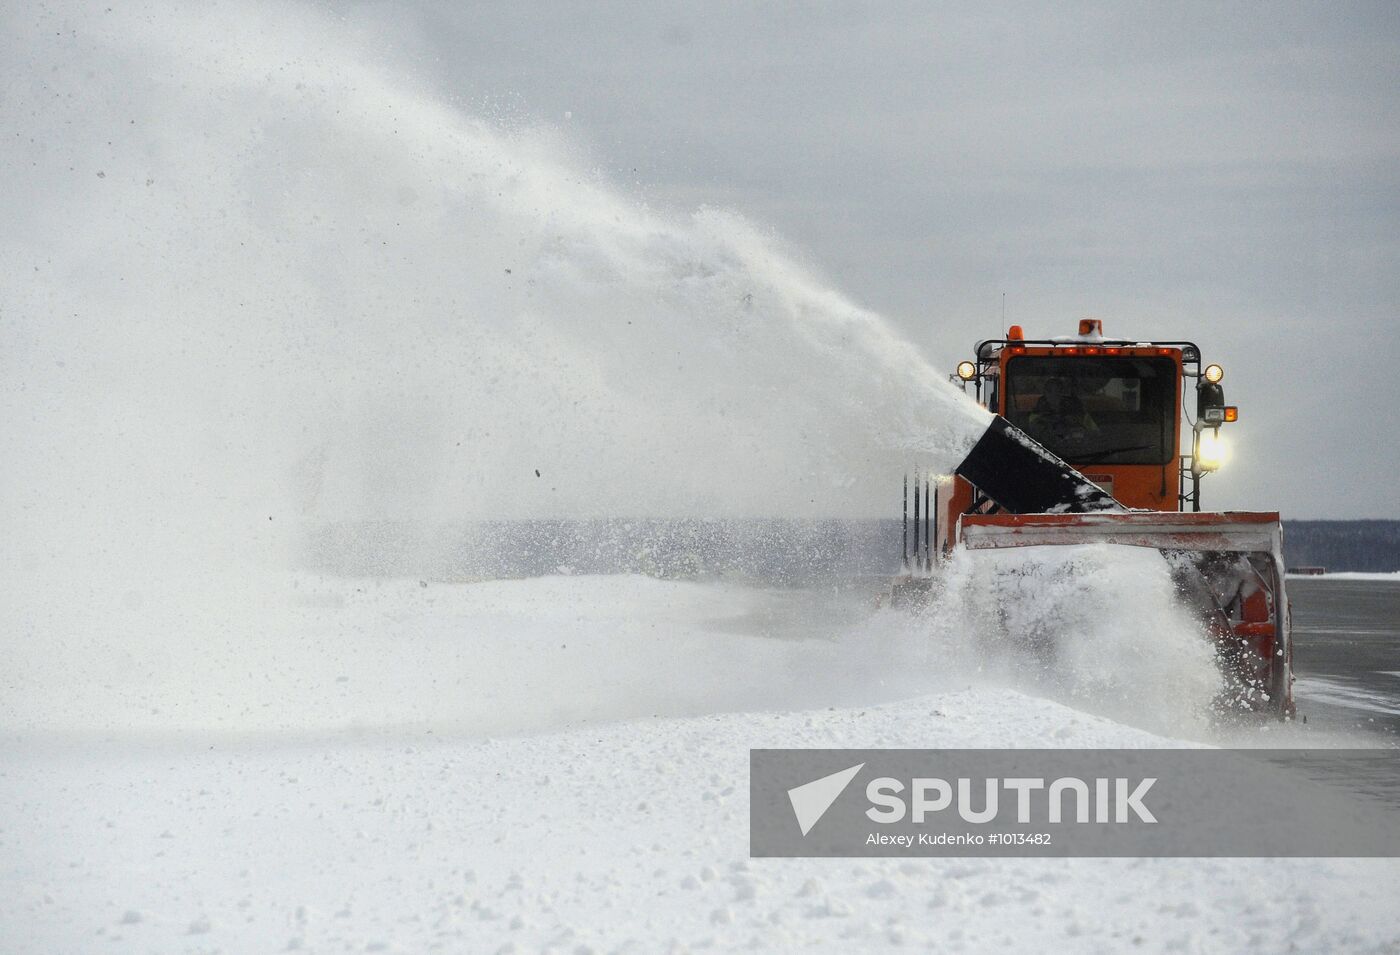 Snow removal from Domodedovo airport runway